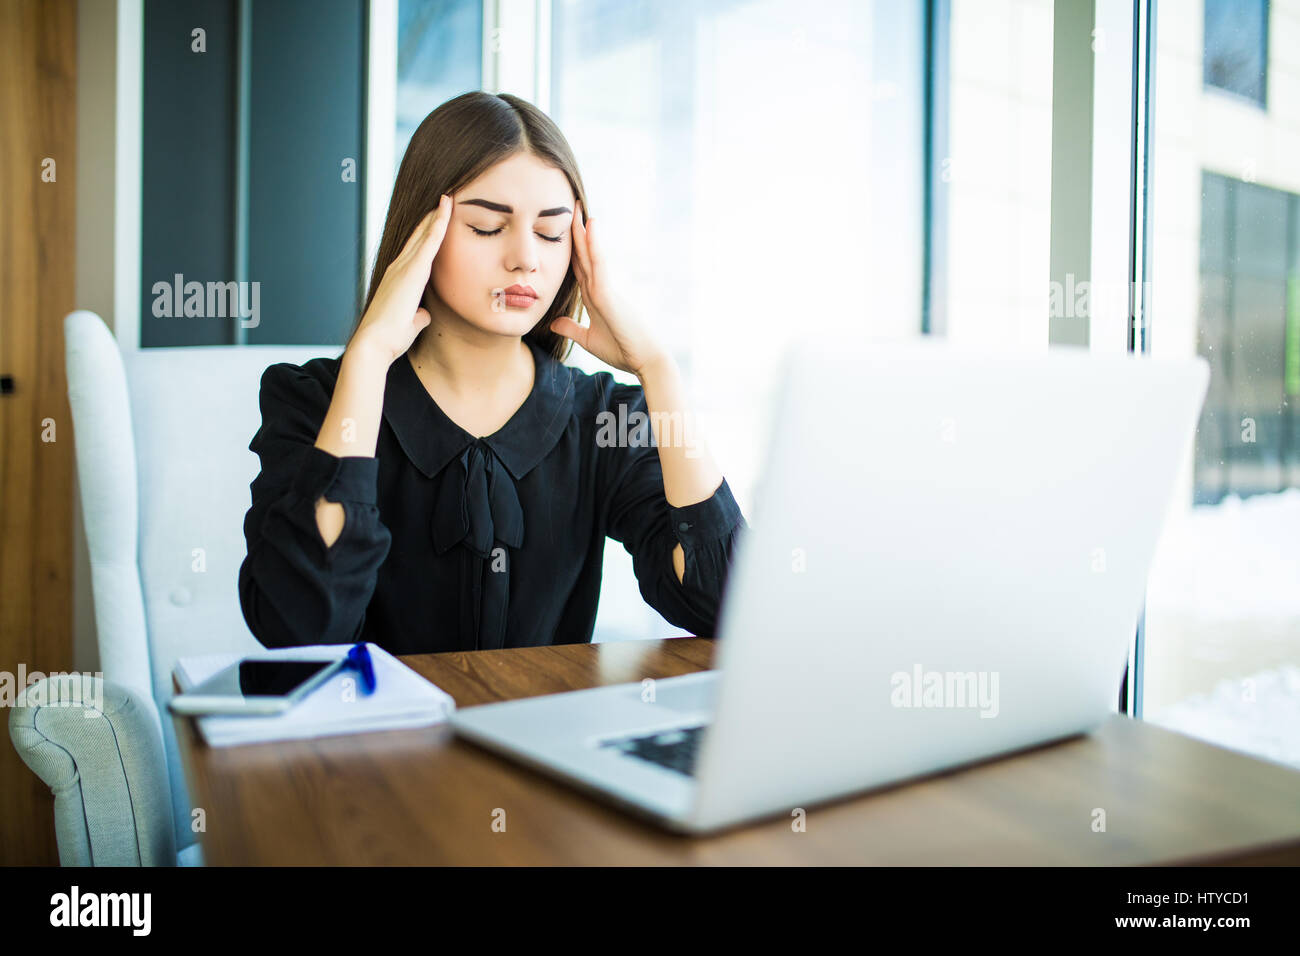 Tired minded woman thinking about way to complete task on laptop at table in cafe Stock Photo